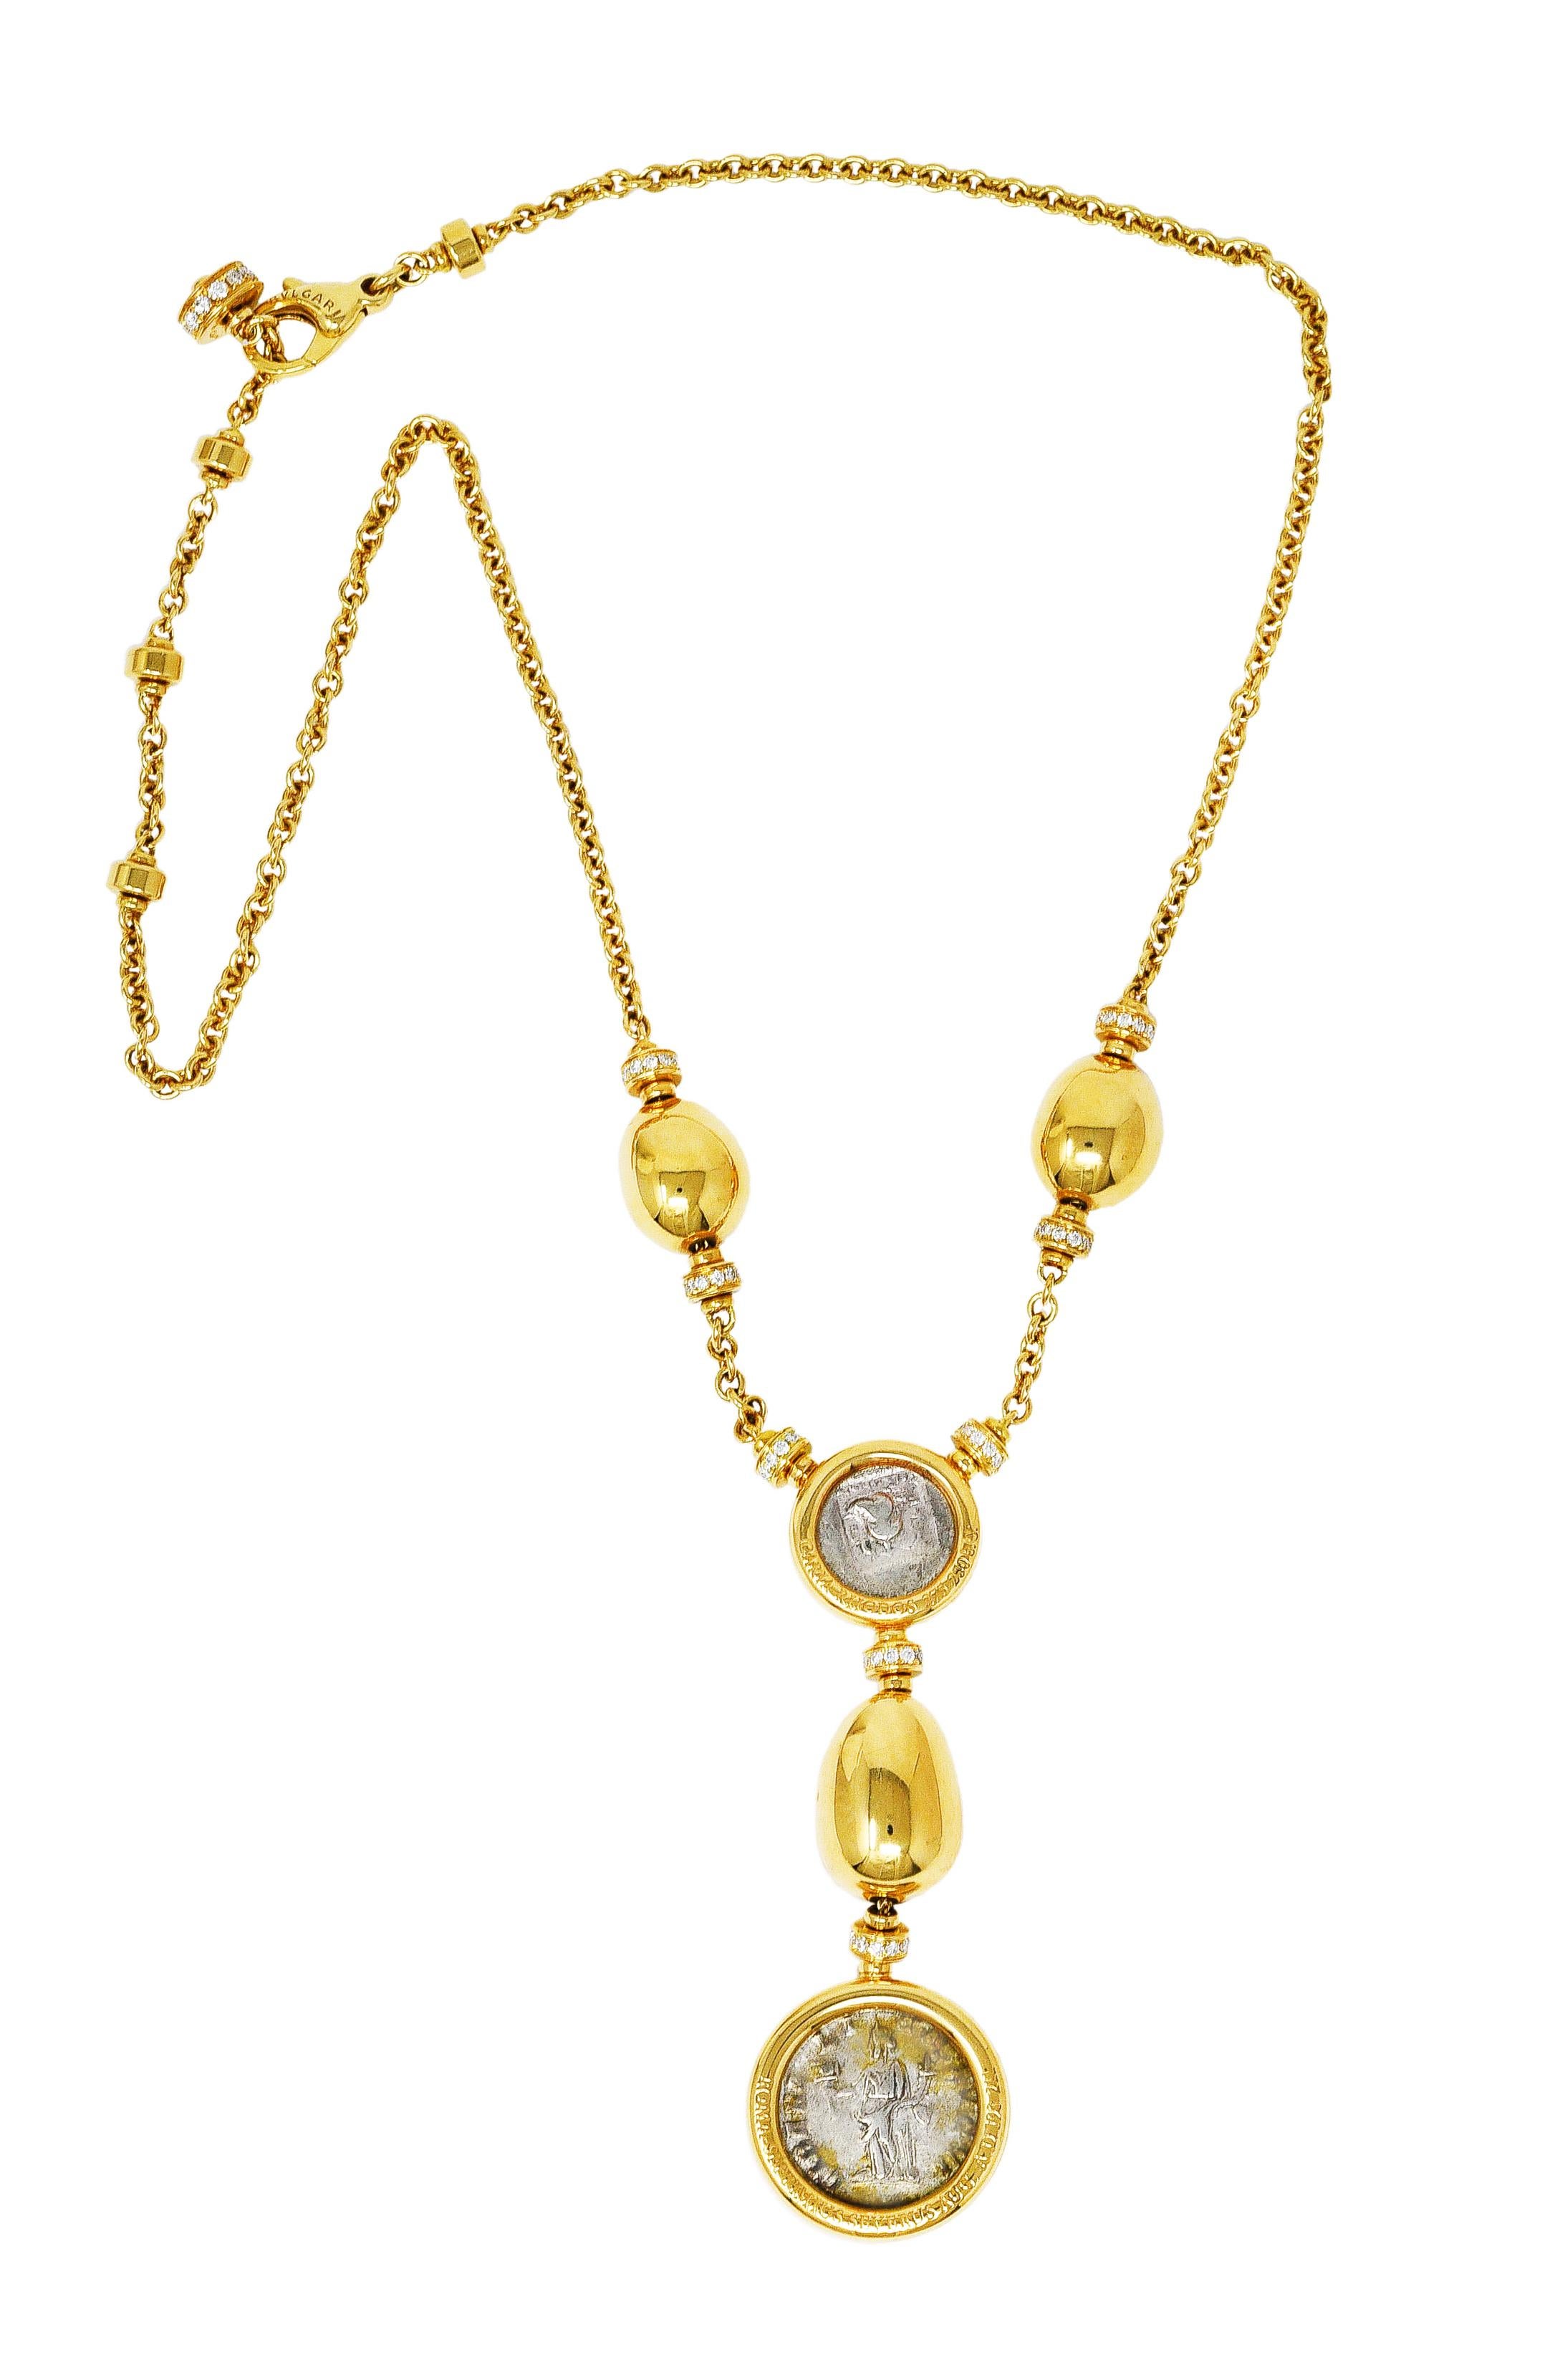 Cable chain necklace features intermittent gold rondelle stations and polished gold organic forms. Featuring two ancient coins bezel set in polished gold surrounds inscribed with their details. Surmount is a silver didrachm featuring Helios, the sun